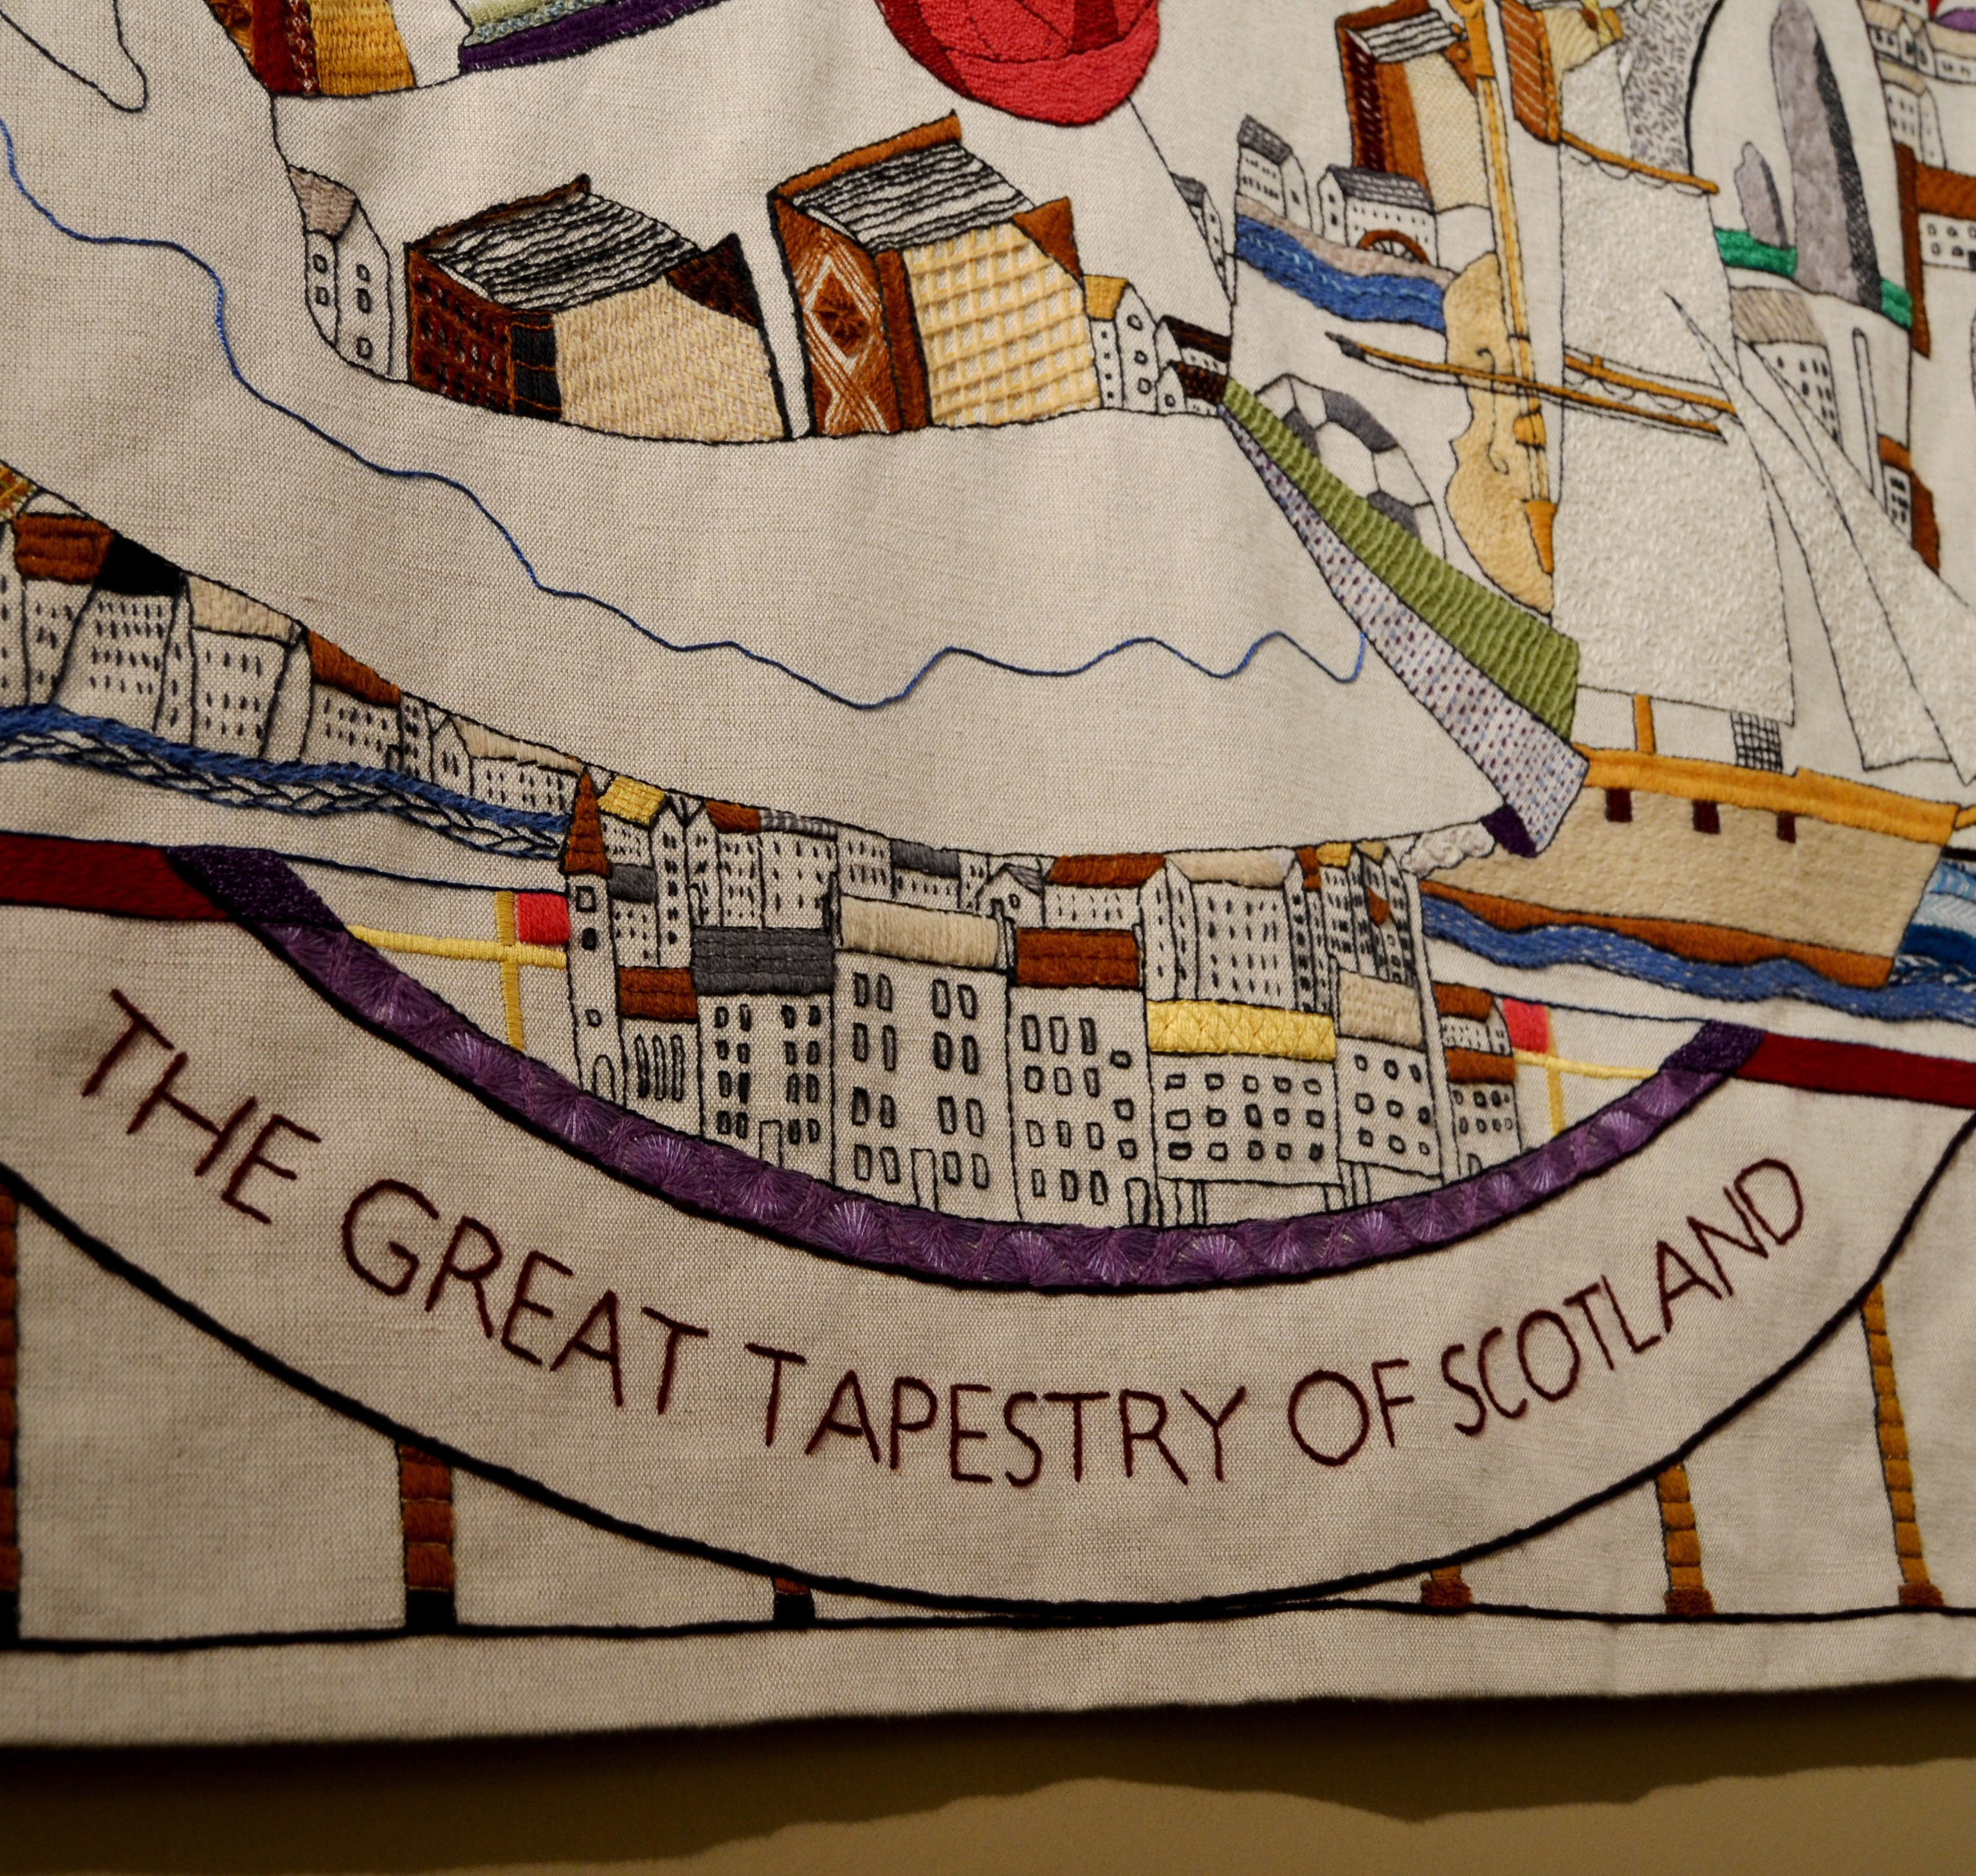 A close up of the main tapestry panel